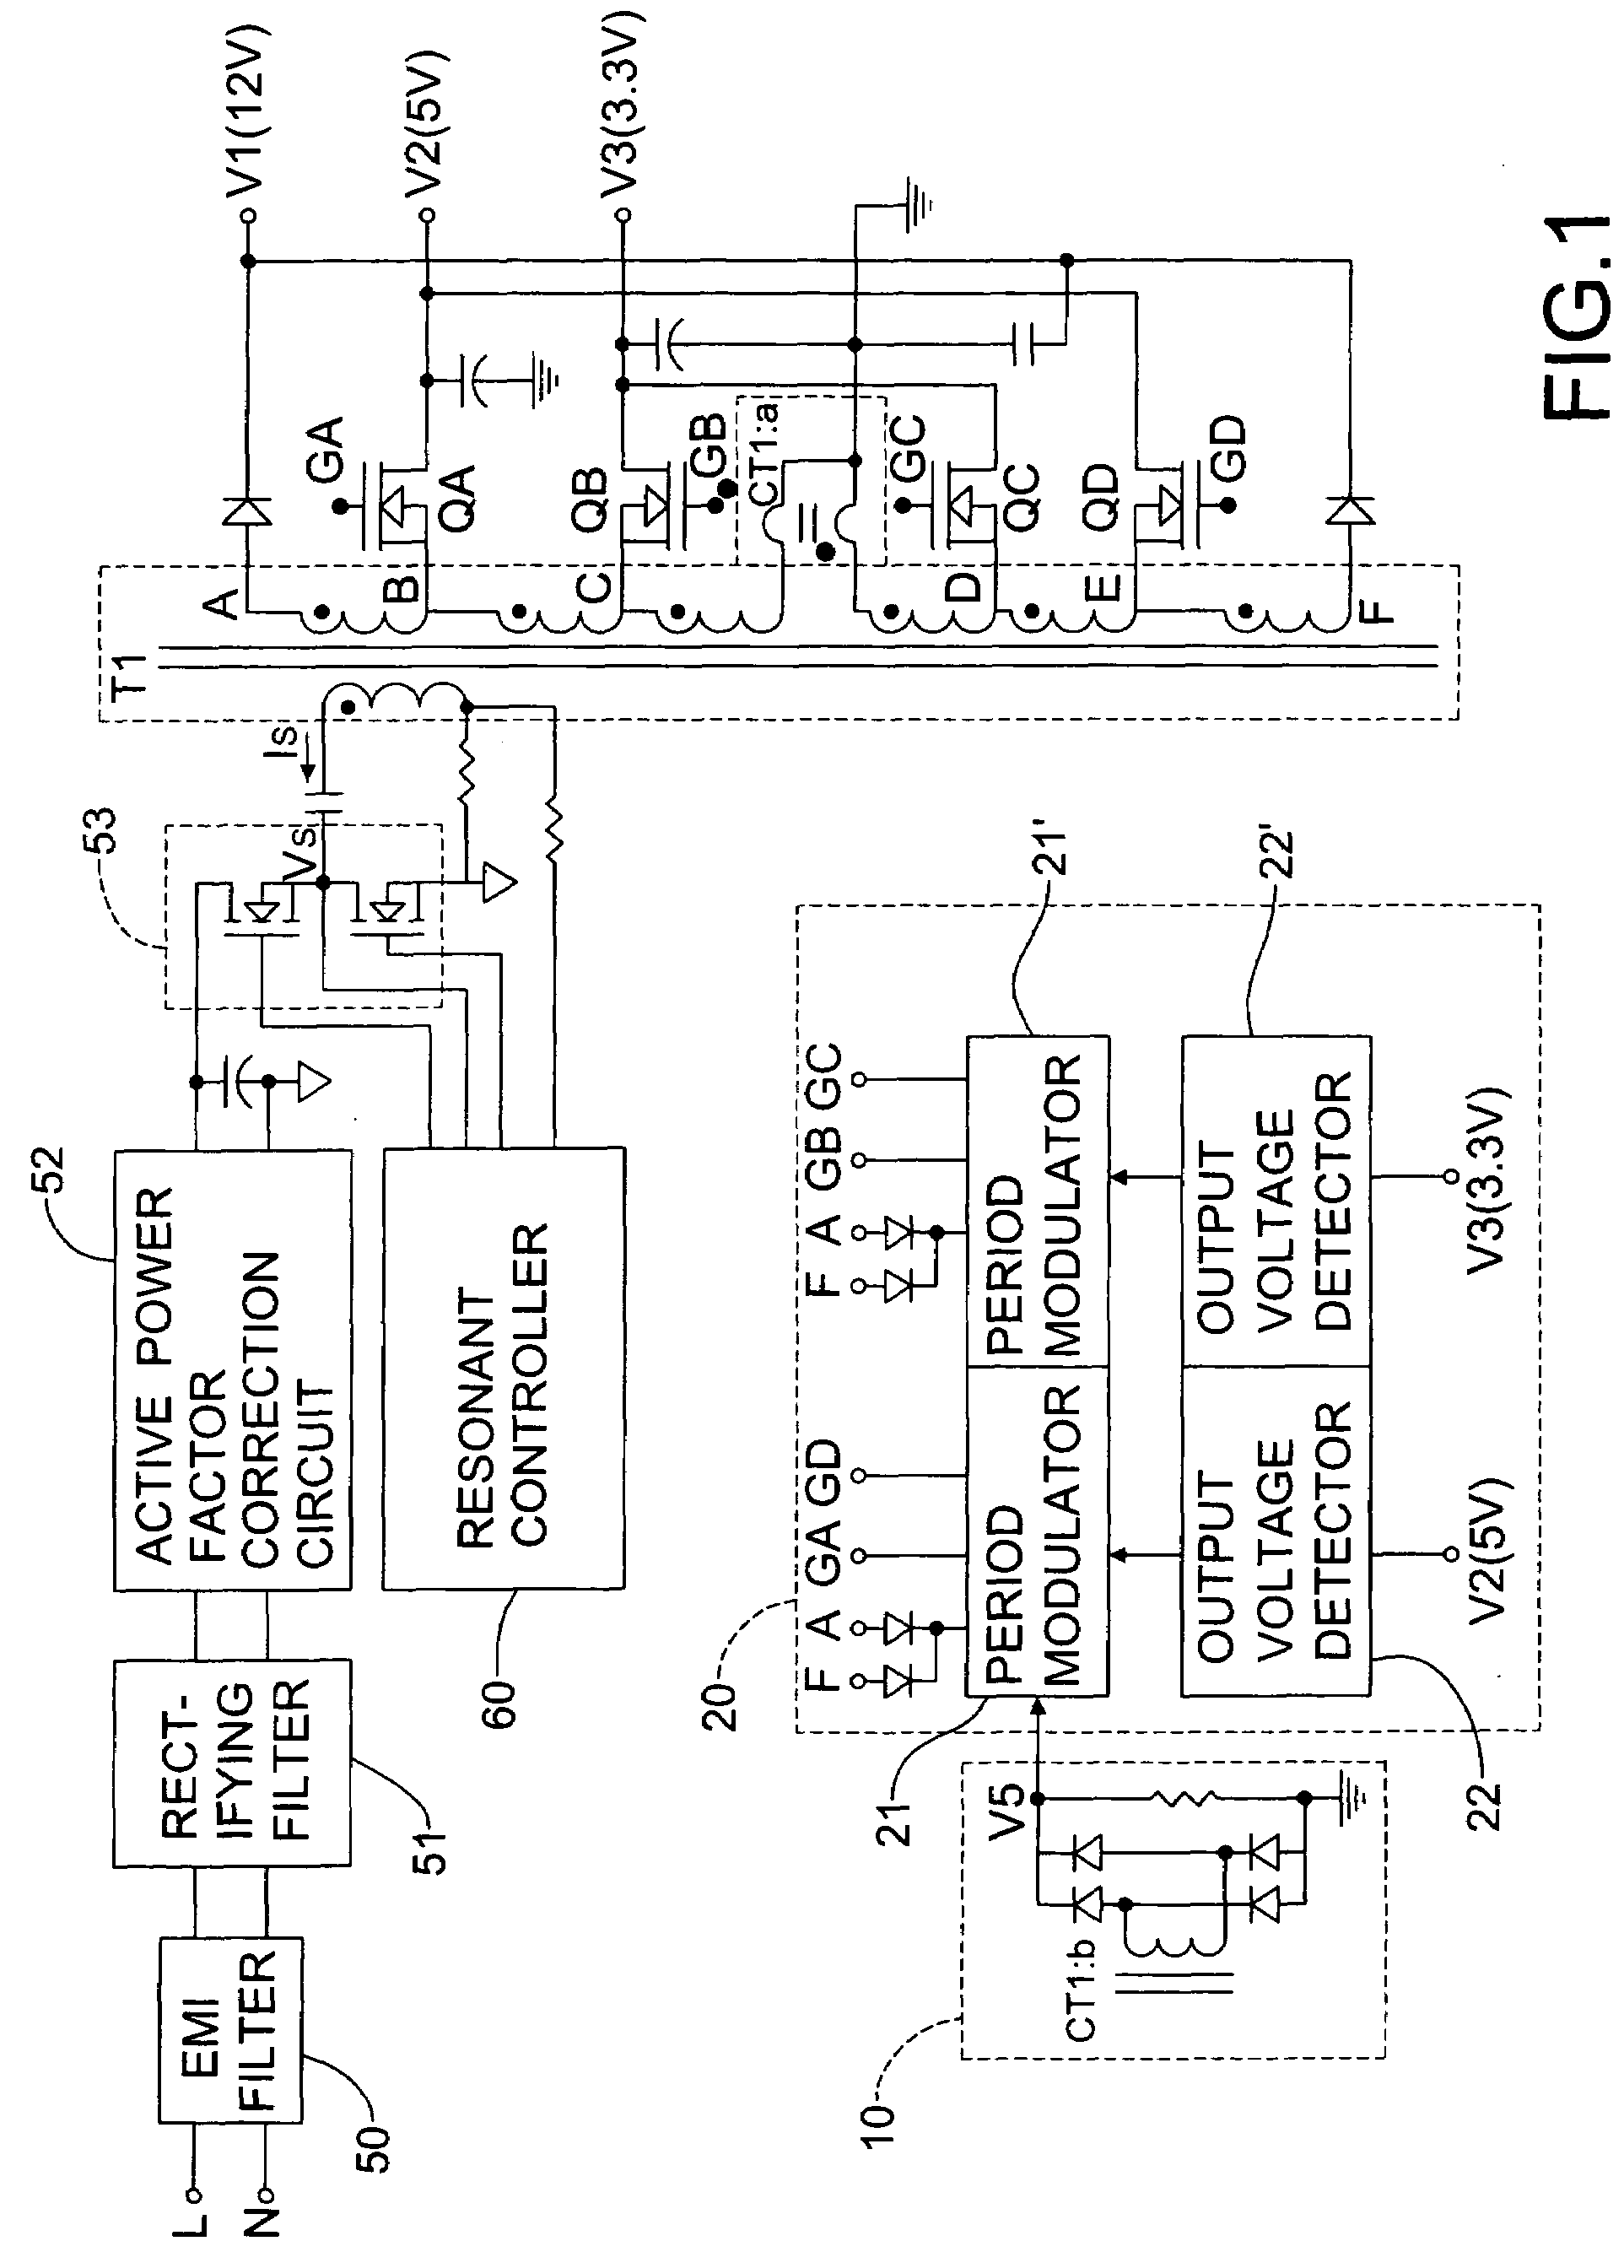 Synchronous voltage modulation circuit for resonant power converter